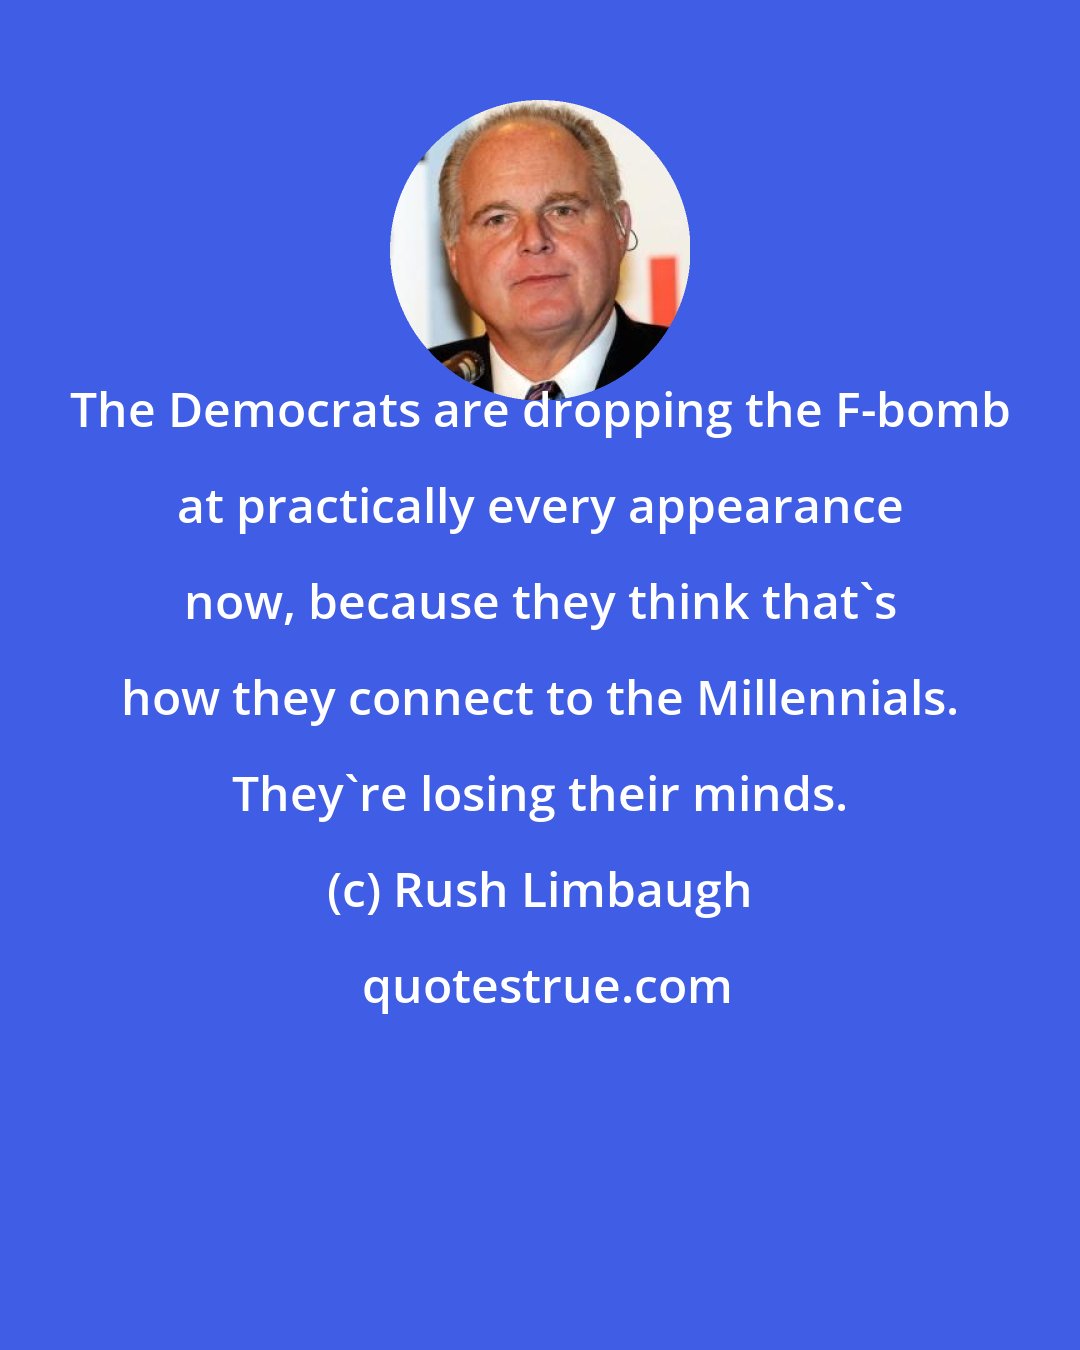 Rush Limbaugh: The Democrats are dropping the F-bomb at practically every appearance now, because they think that's how they connect to the Millennials. They're losing their minds.